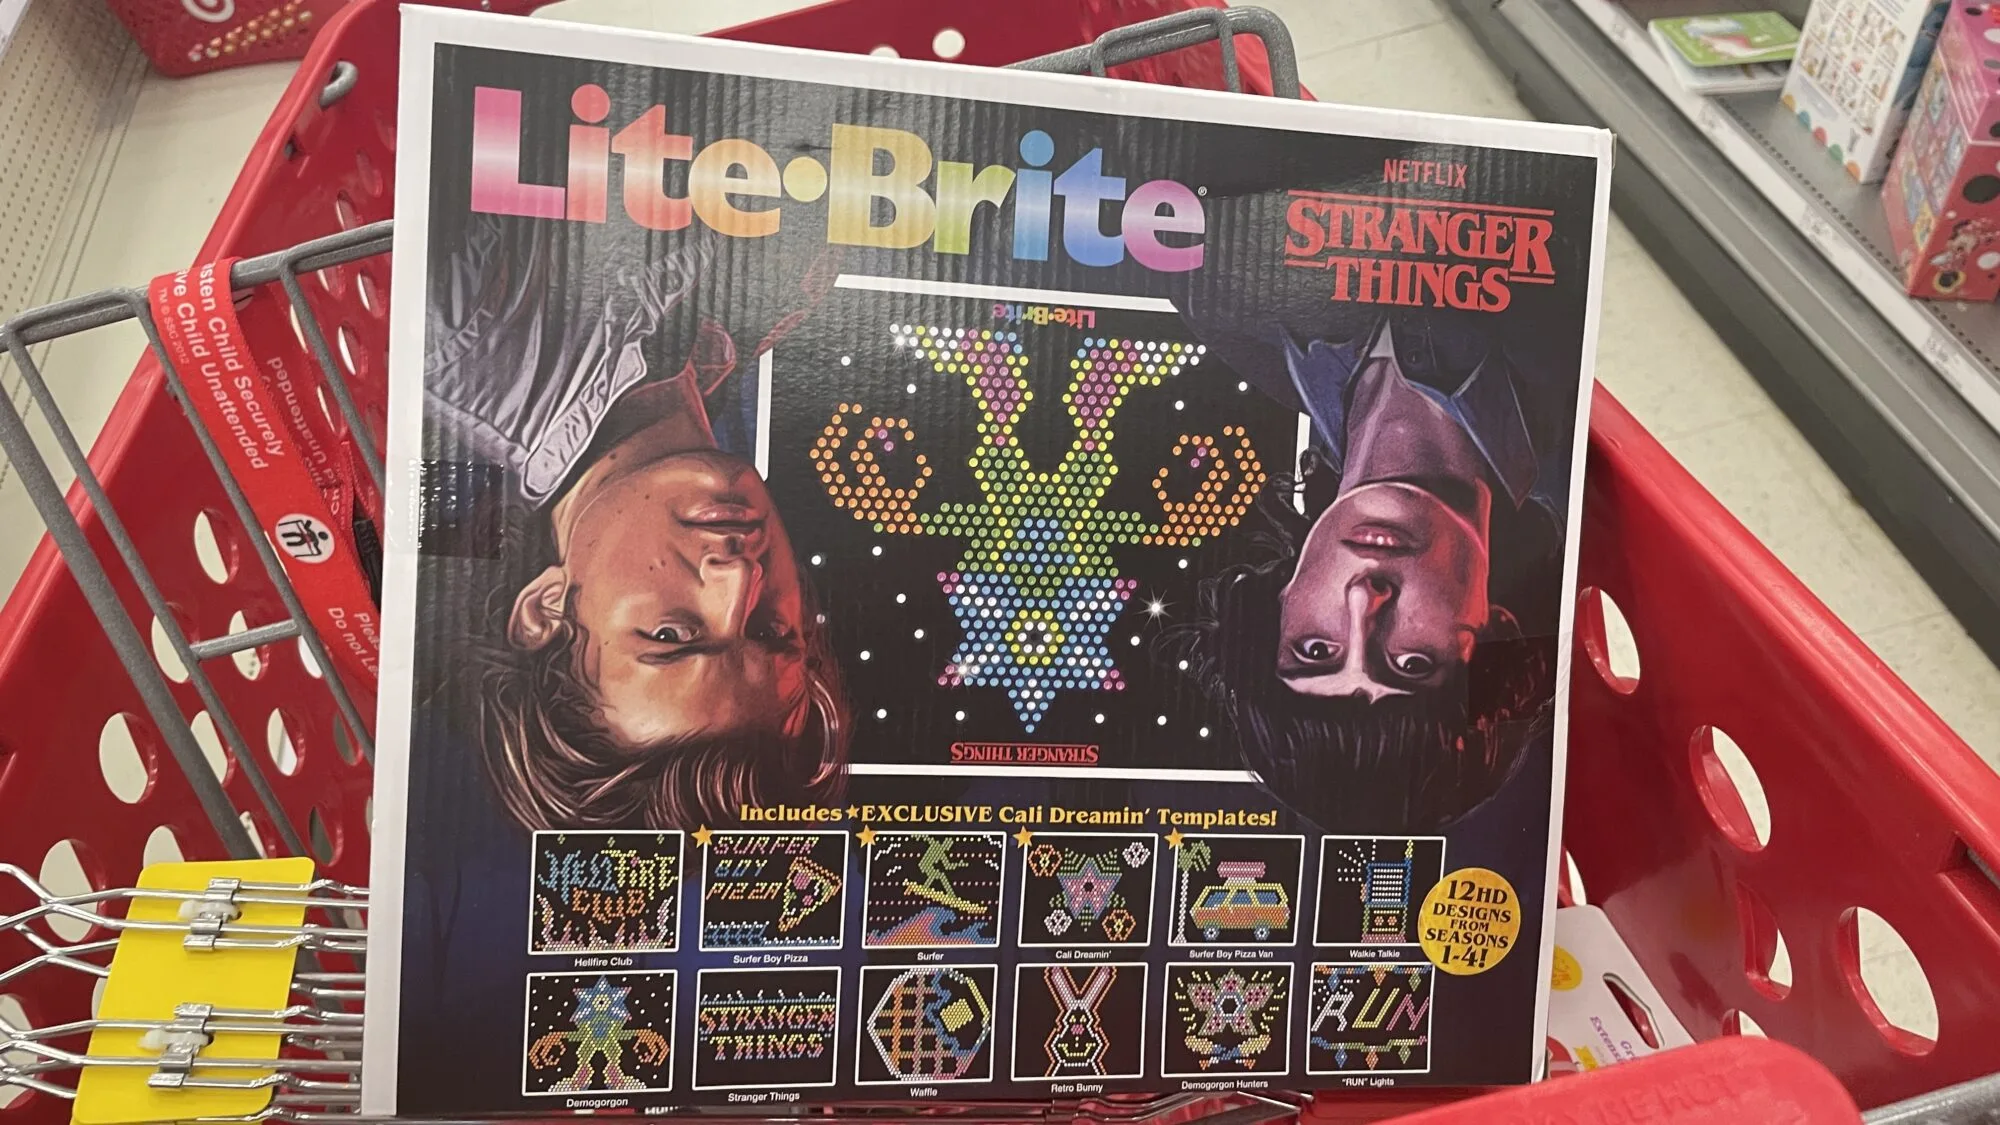 STRANGER THINGS LITE-BRITE DELUXE Light-up WALL ART 16 By 16” Brand New  Sealed